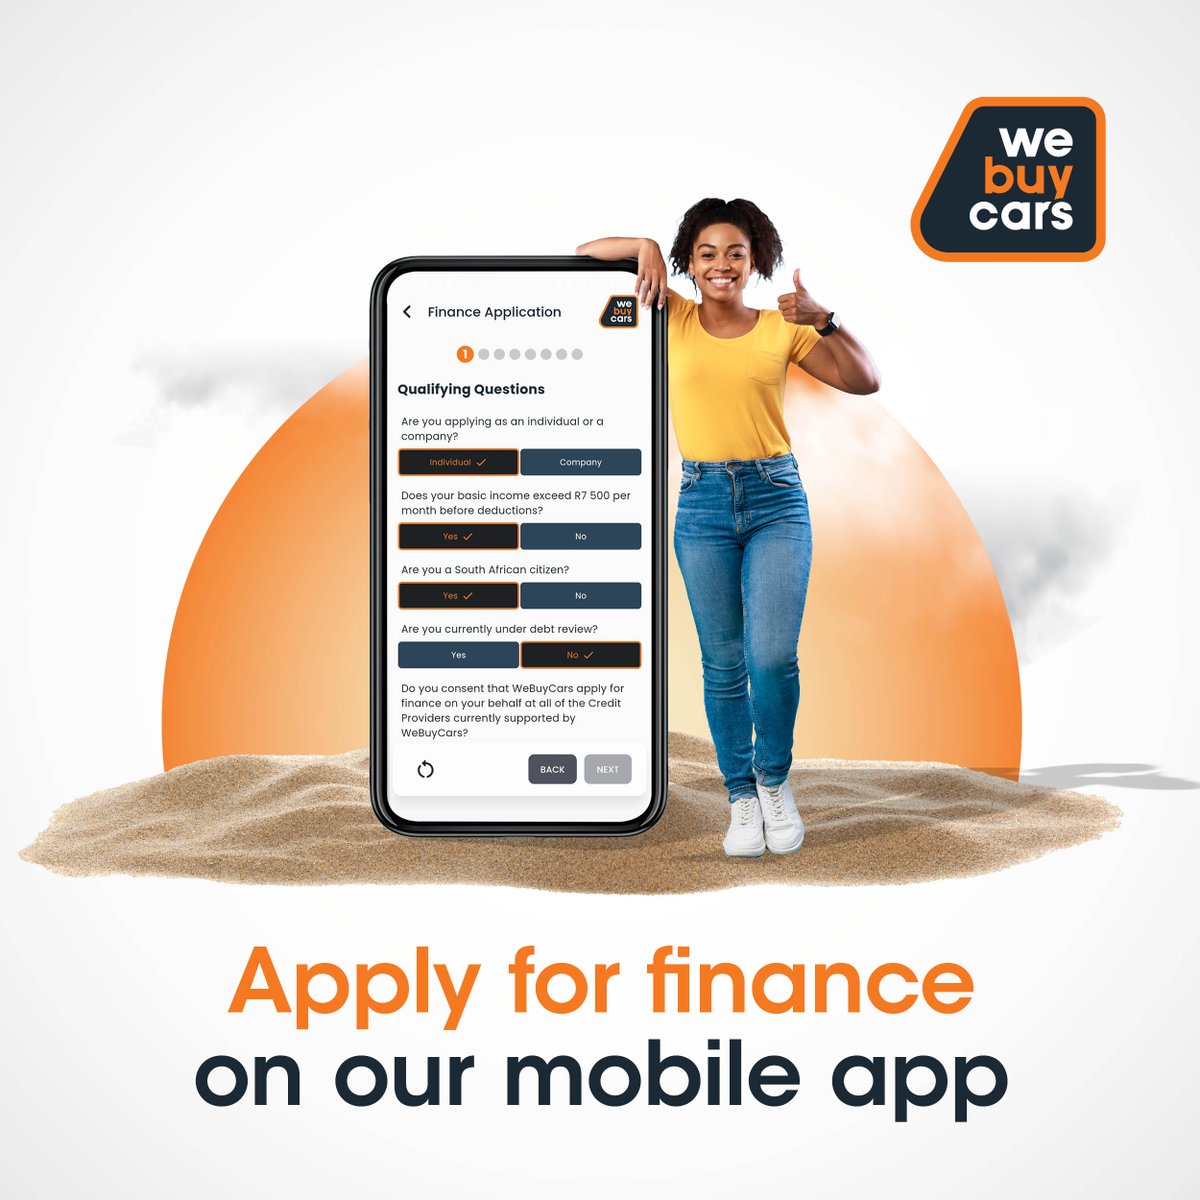 Did you know that you can apply to finance a vehicle on the #WeBuyCars mobile app?
📱

#carsforsale #preownedcars #usedcars #usedcarsforsale #carshopping #carfinance #autosales #carsales #carlifestyle #financeapps